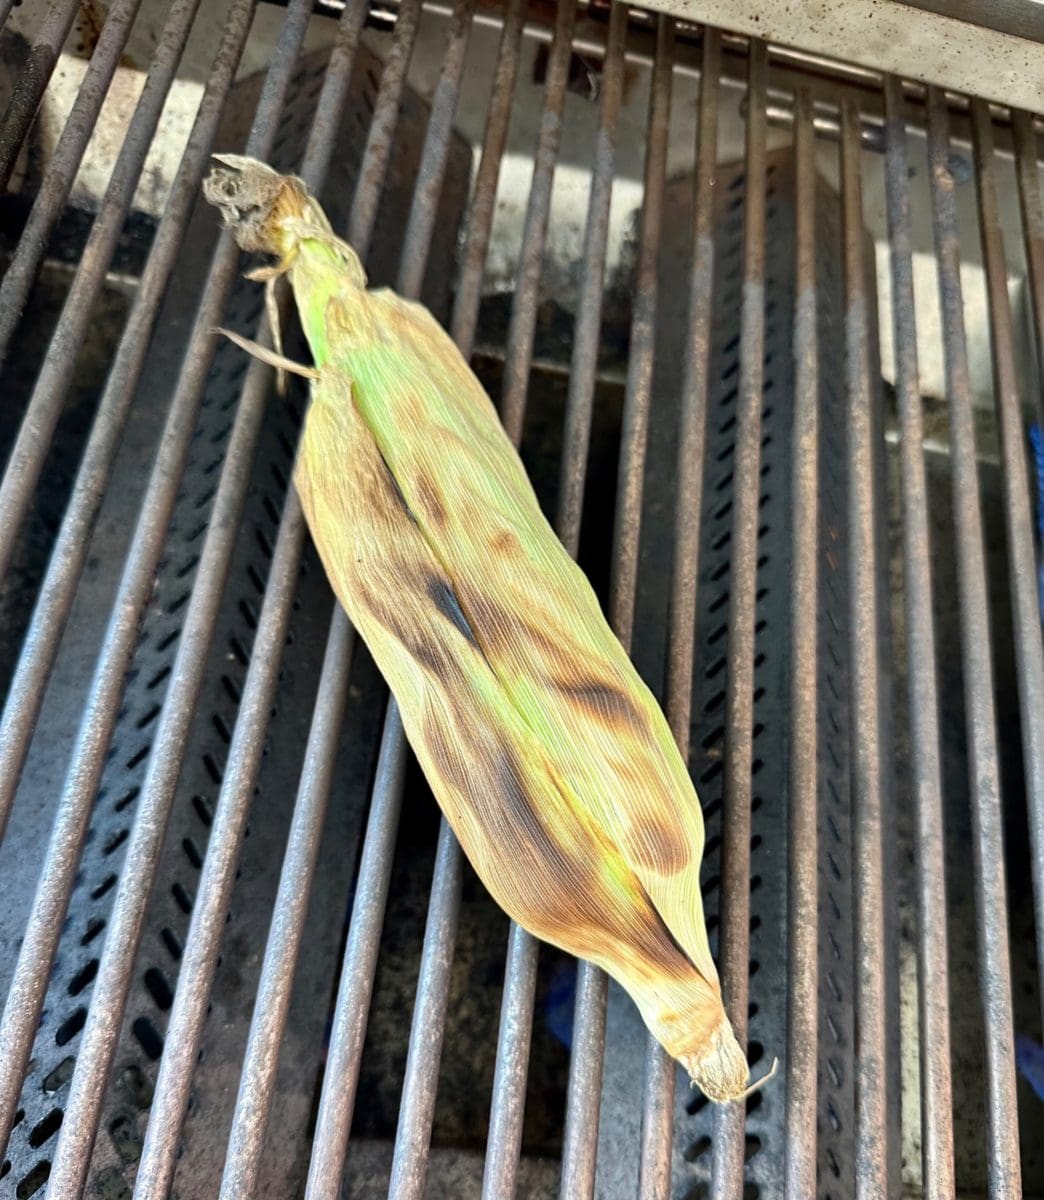 grilled corn 1